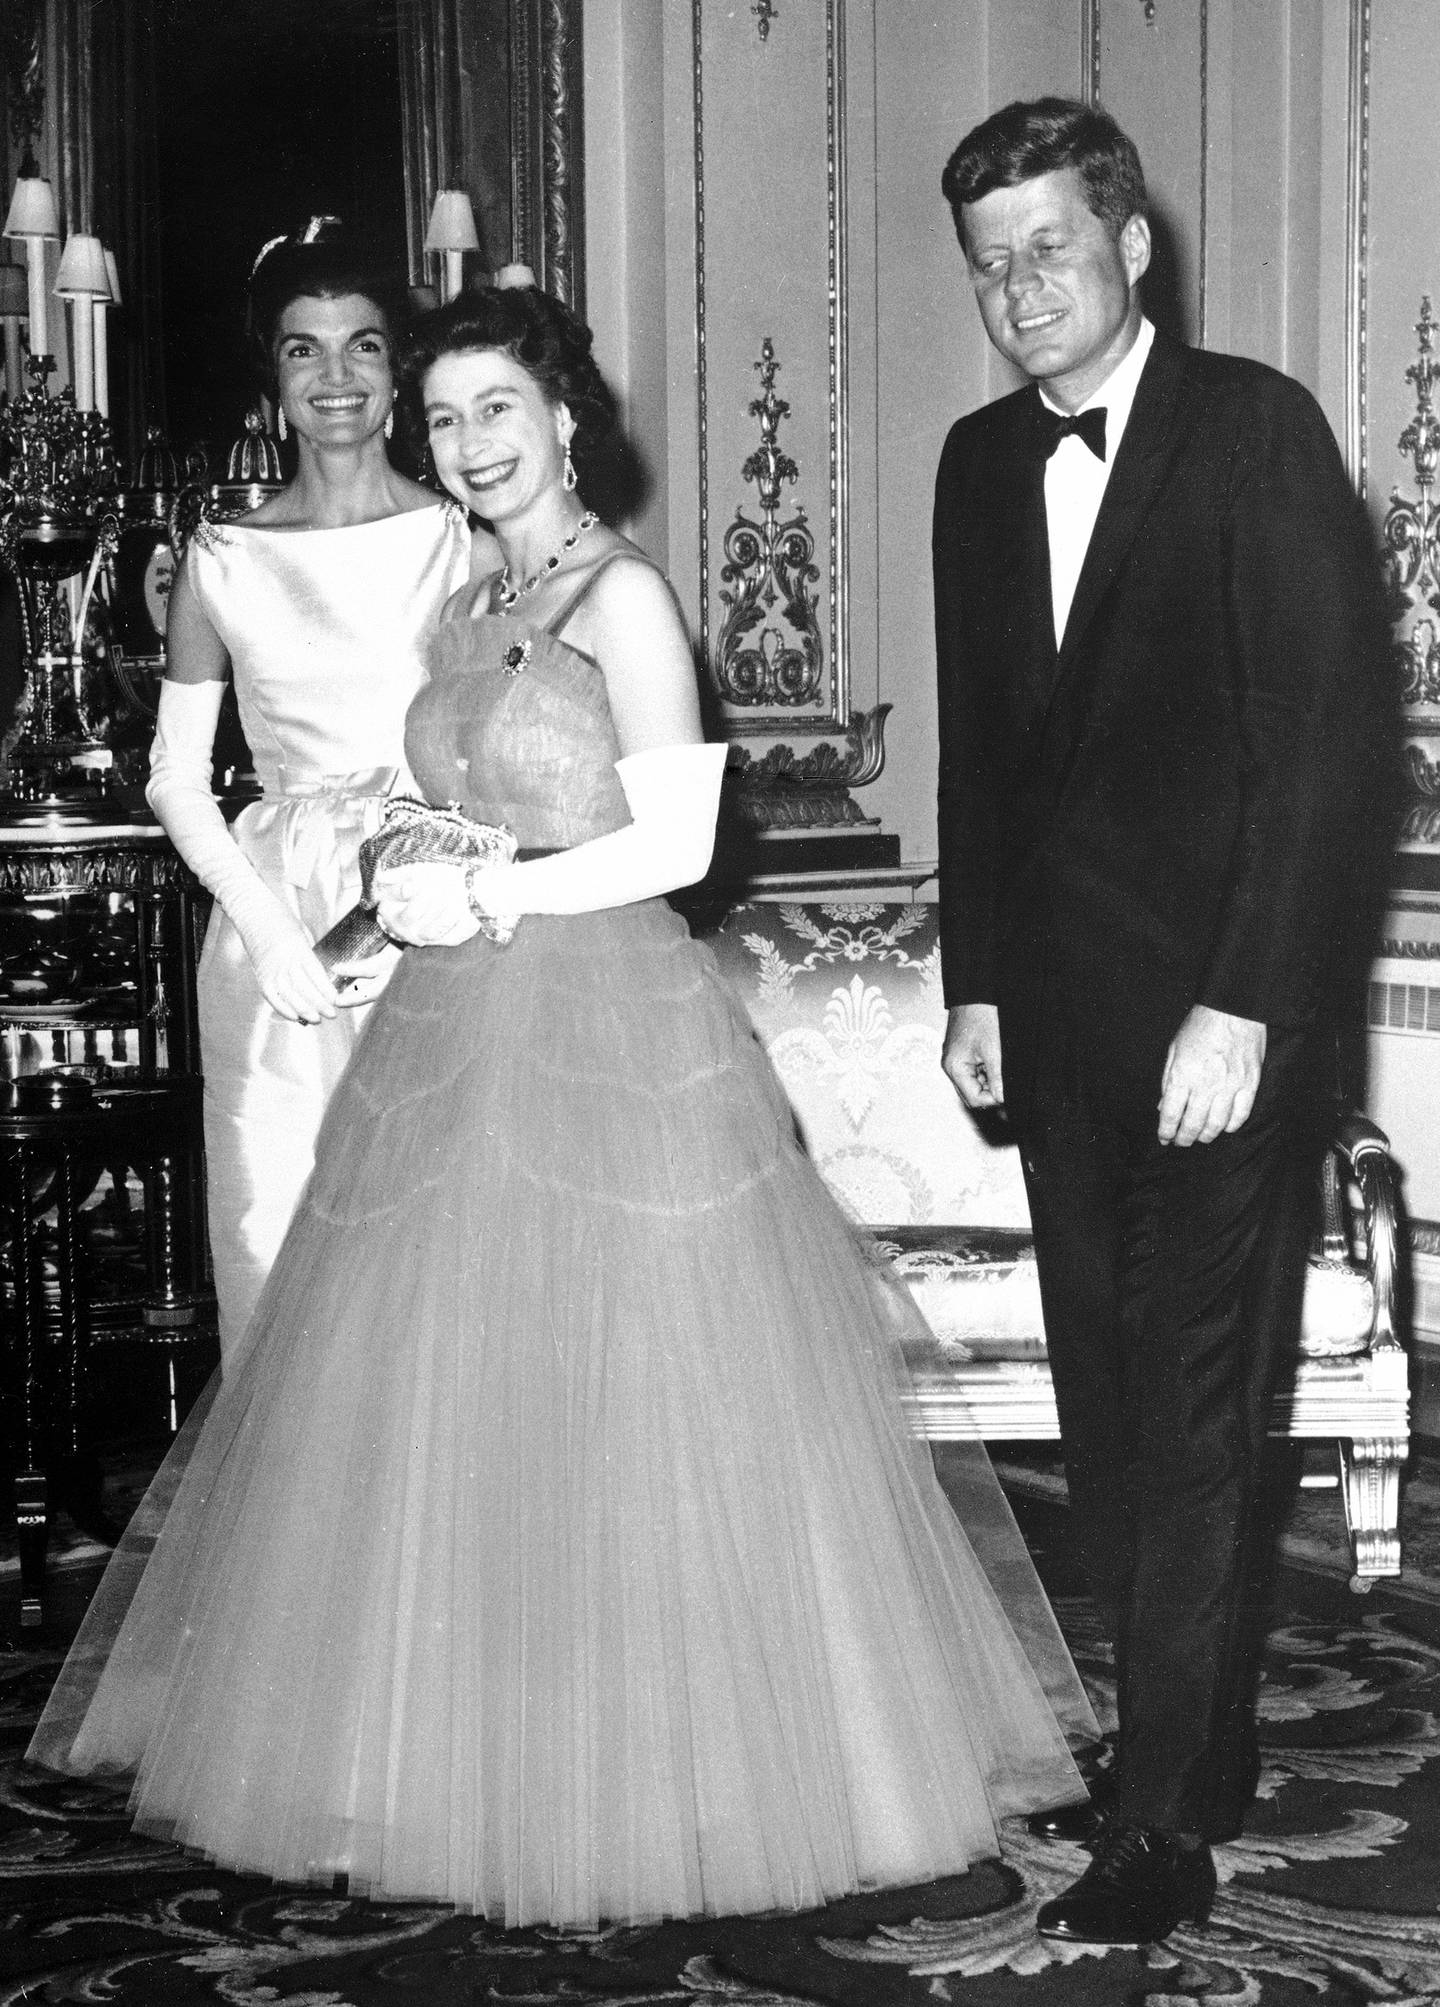 In this file photo dated June 5, 1961, Britain's Queen Elizabeth II, centre, walks with US President John F. Kennedy, right, and his wife Jacqueline Kennedy, as they enter an ante-room in Buckingham Palace, London, before a dinner given by the Queen in honor of the visiting President and his wife.